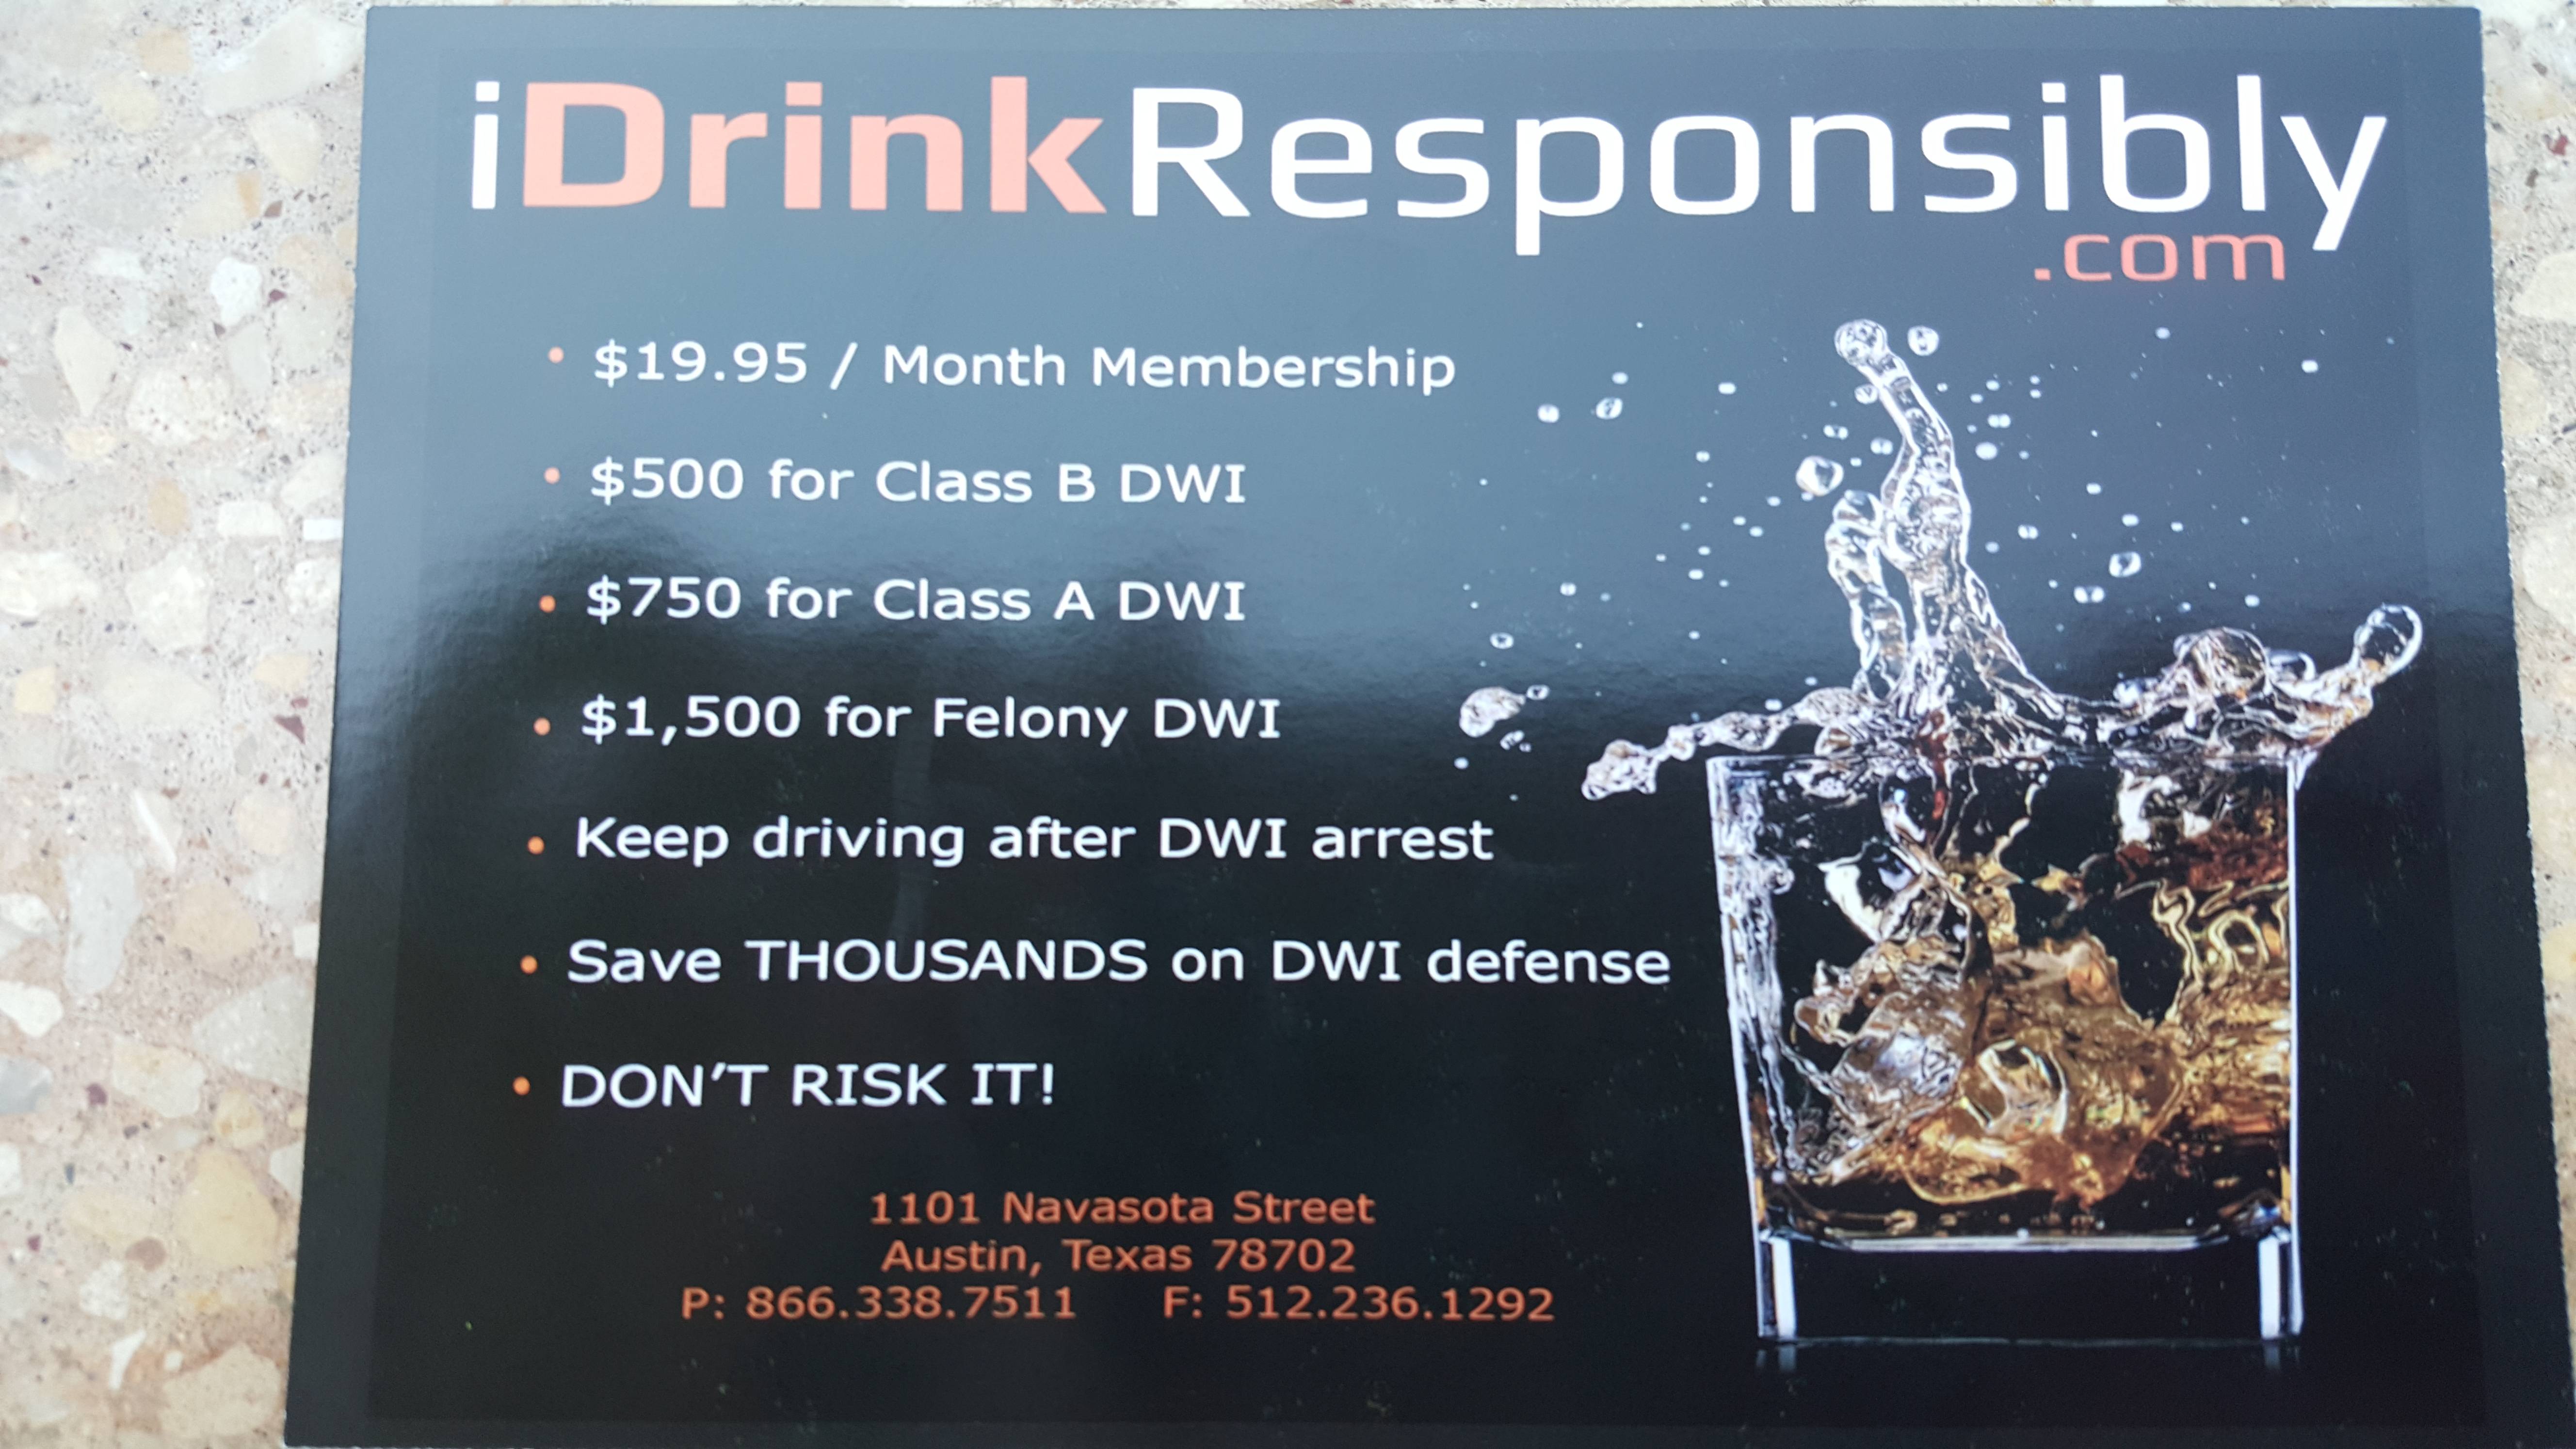 water - iDrinkResponsibly Co $19.95 Month Membership $500 for Class B Dwi $750 for Class A Dwi $1,500 for Felony Dwi Keep driving after Dwi arrest Save Thousands on Dwi defense Don'T Risk It! 1101 Navasota Street Austin, Texas 78702 P 866.338.7511 F 512.2